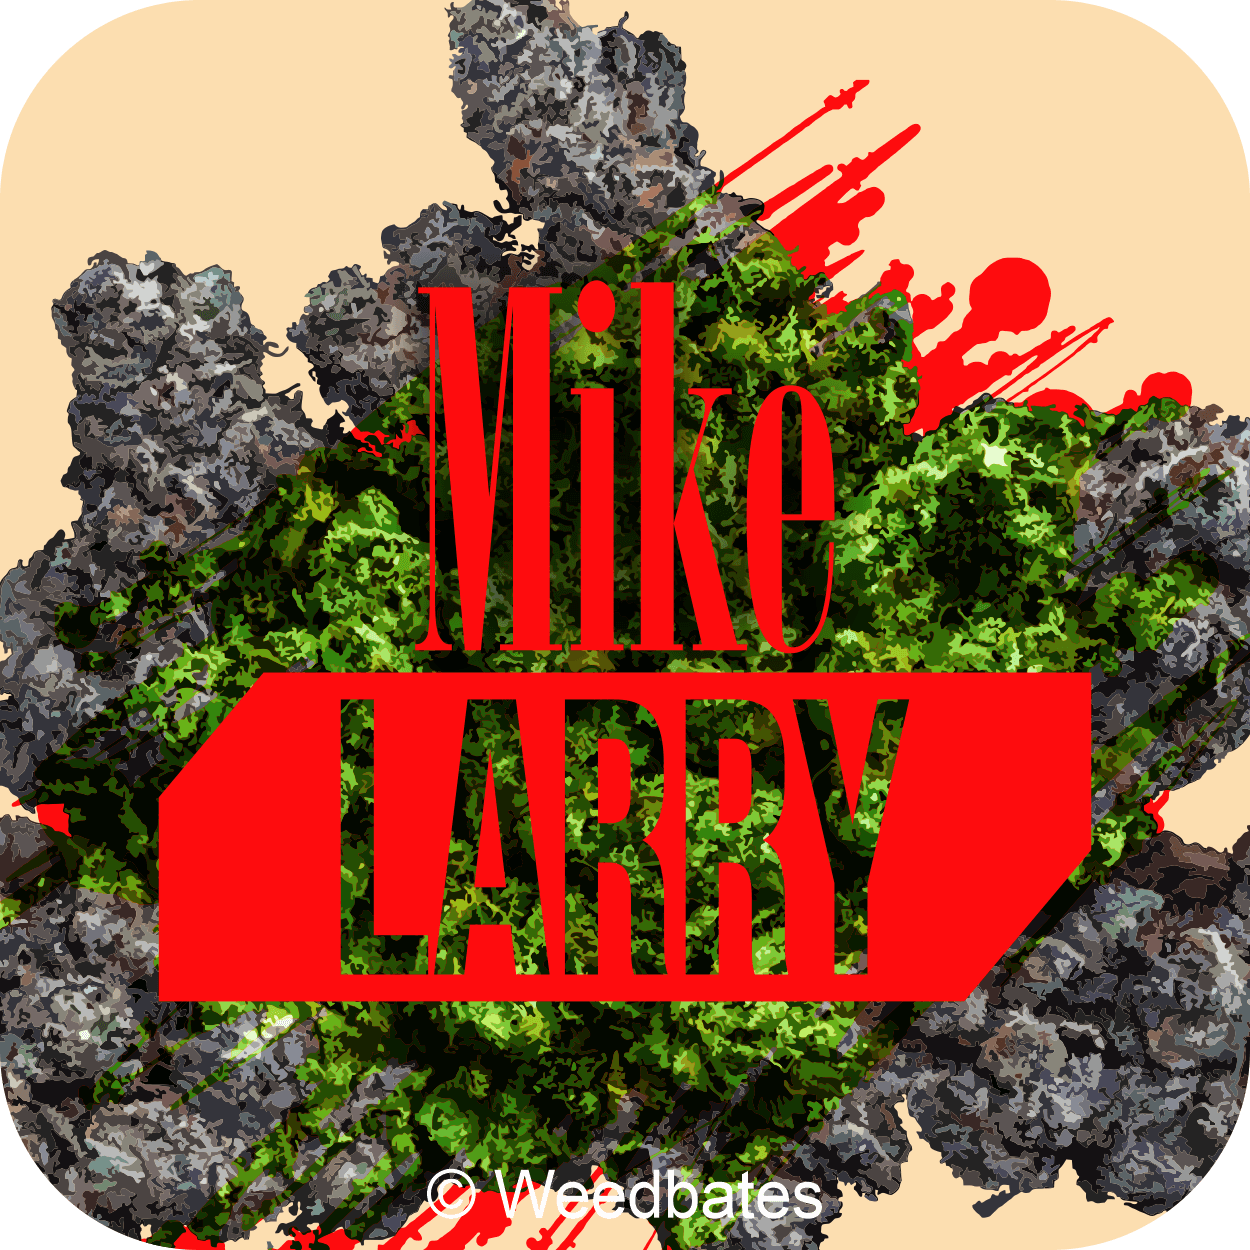 Mike Larry strain